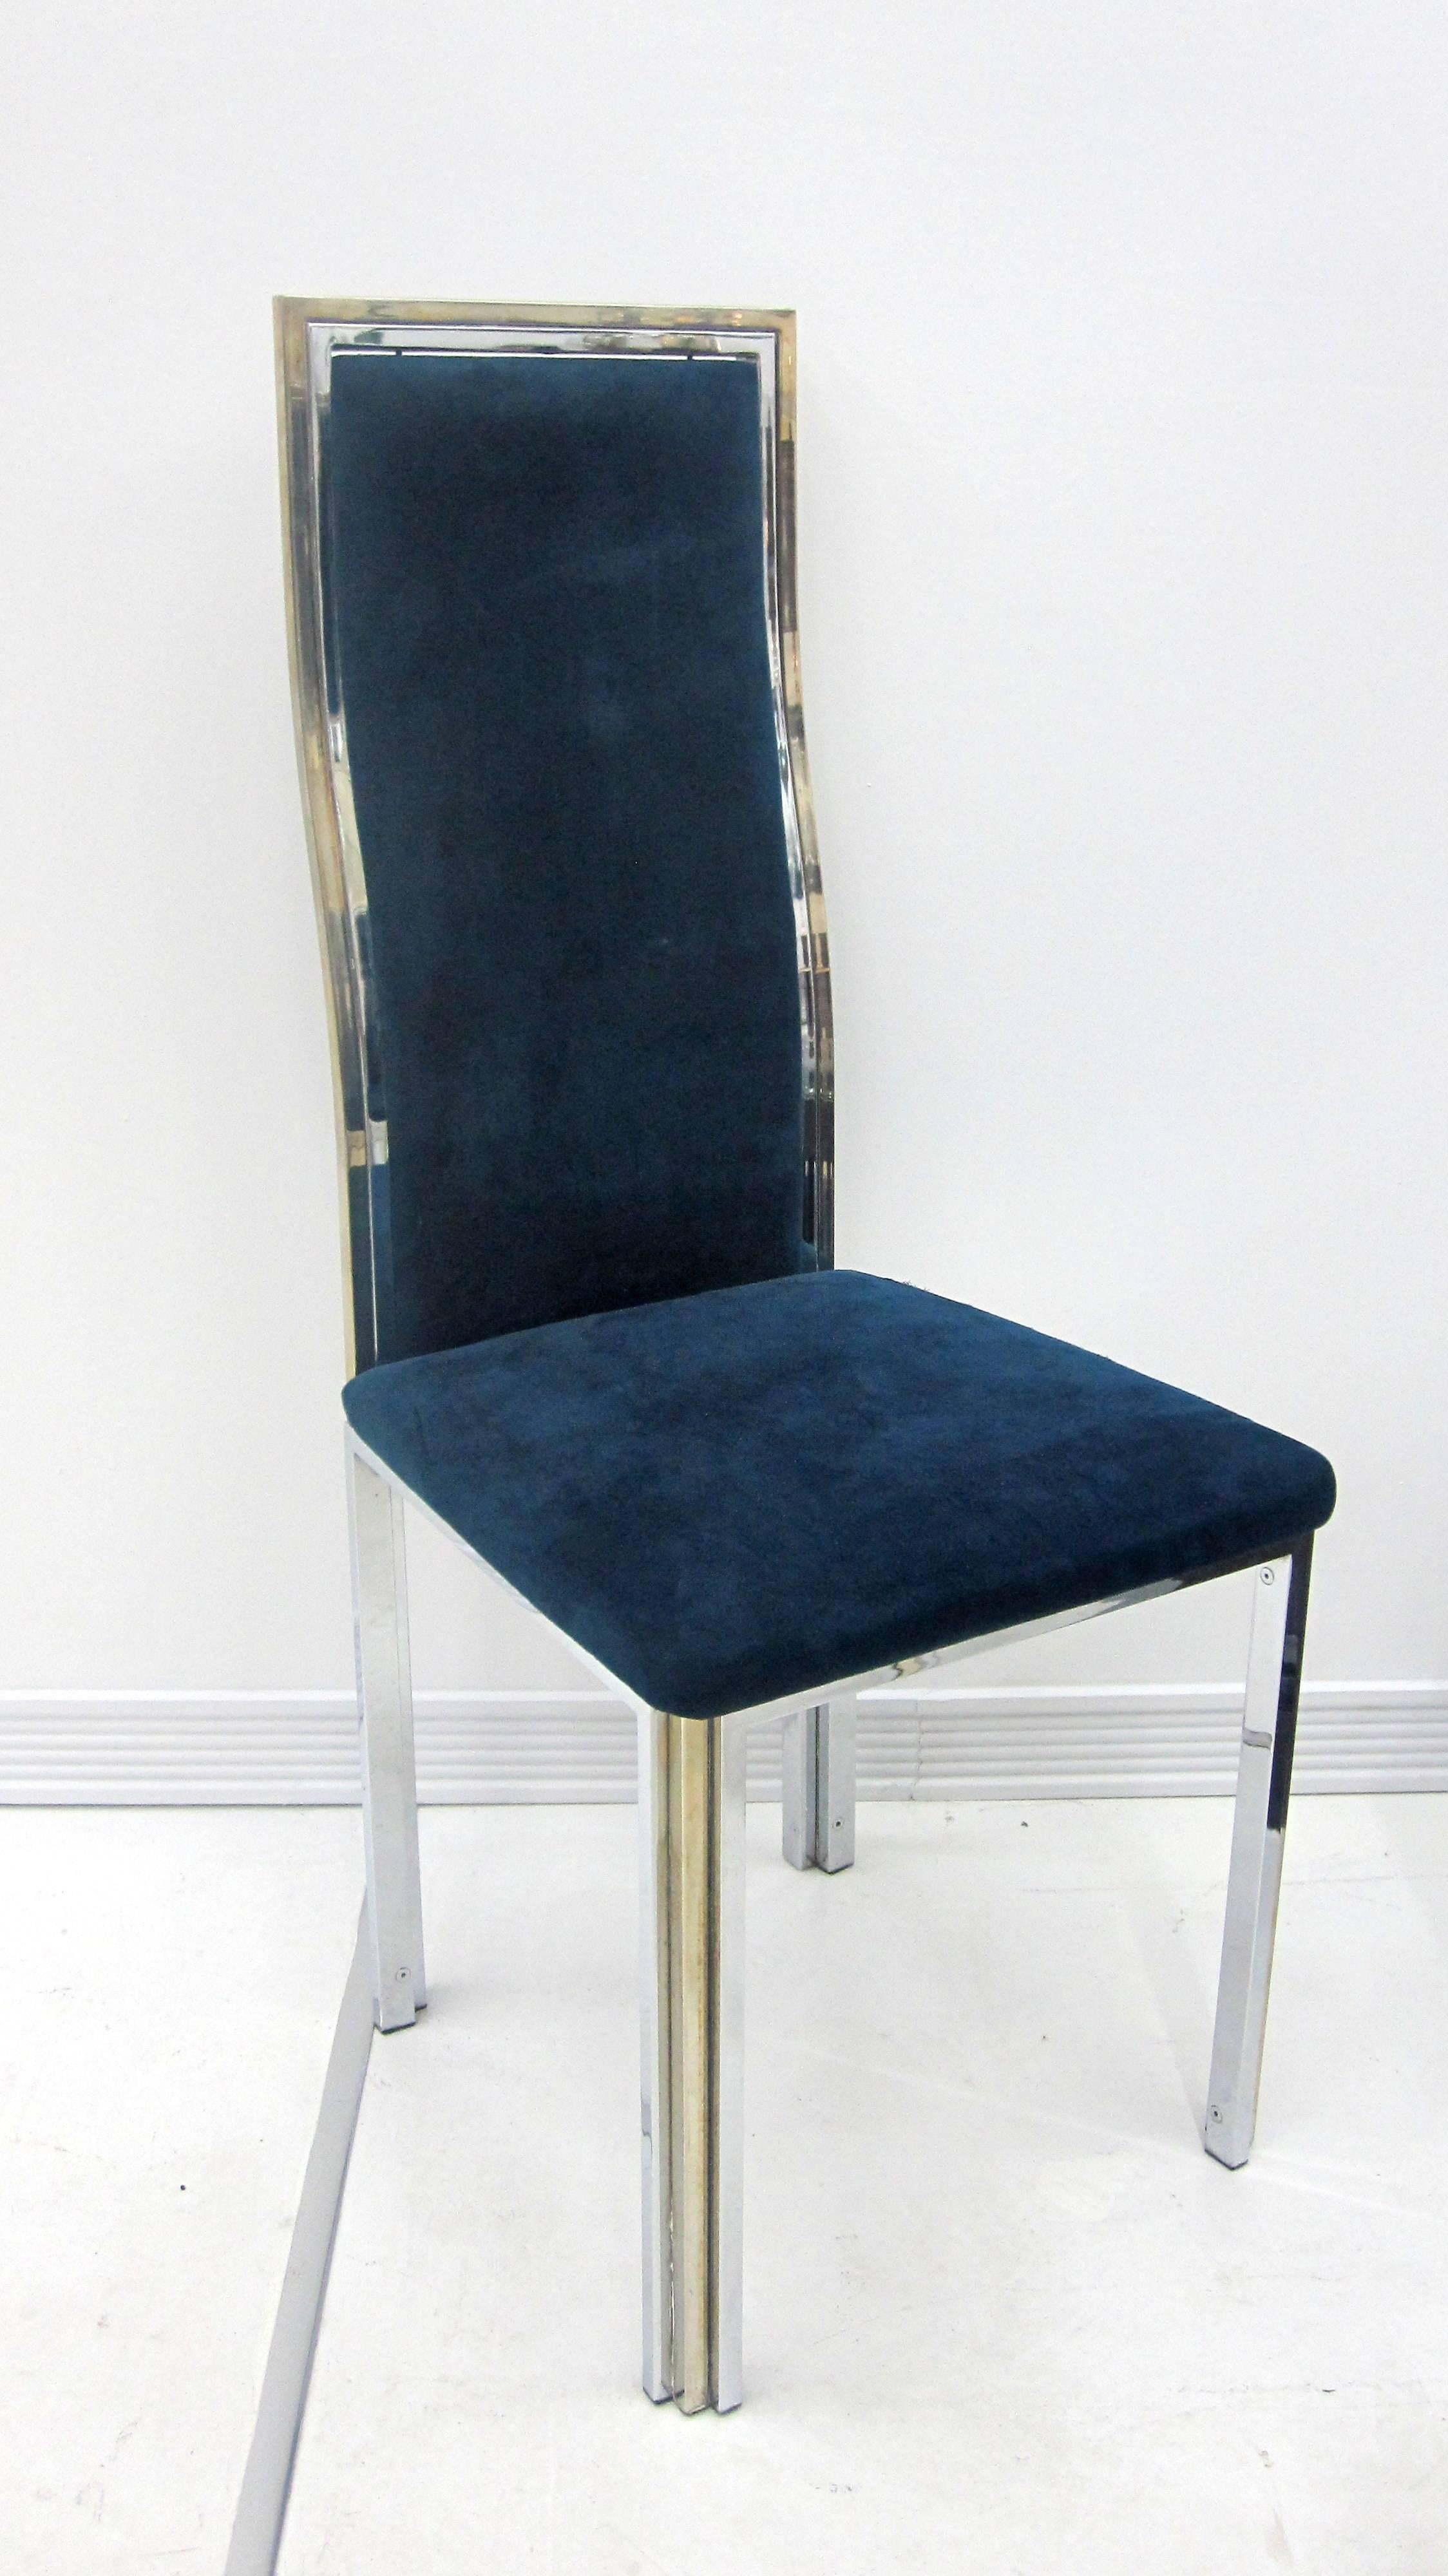 Six brass and chrome Mid-Century dining chairs with curved backs and original deep blue velvet upholstery, by Romeo Rega.